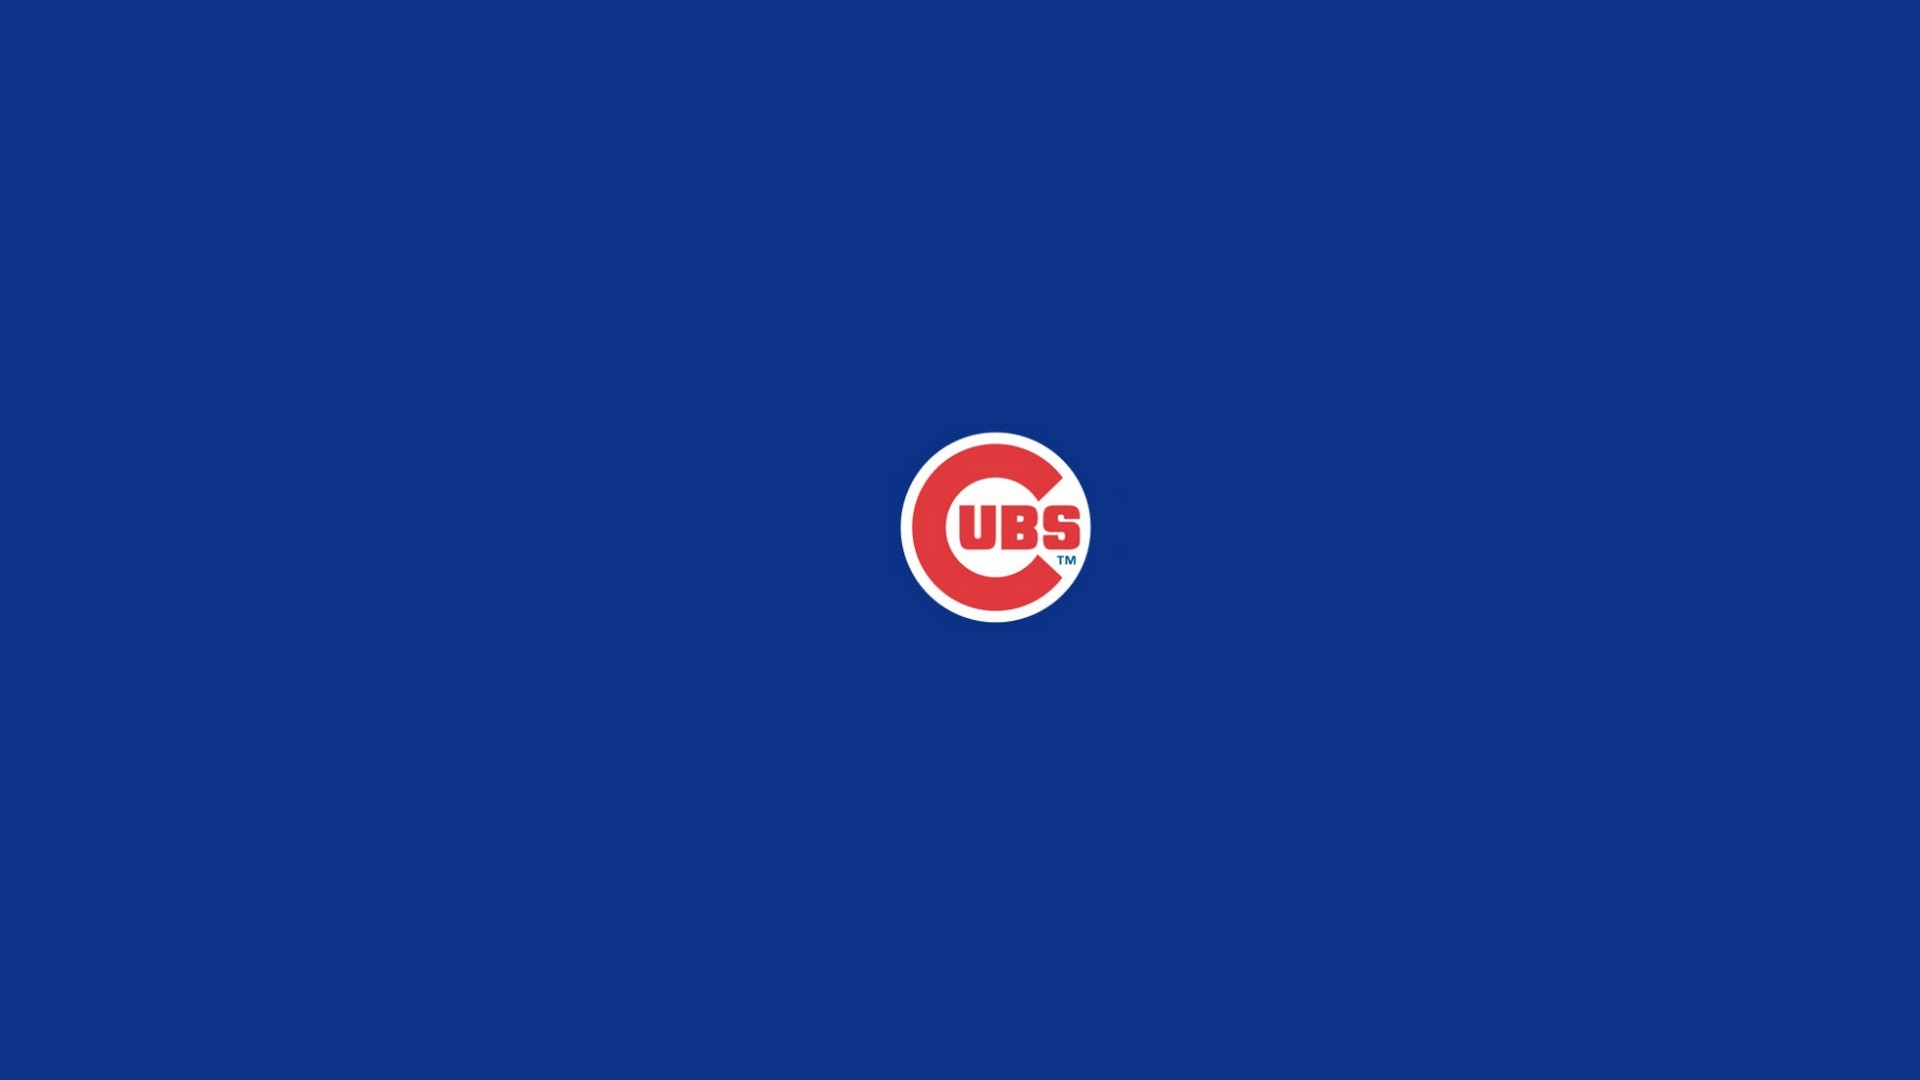 Wallpaper Desktop Chicago Cubs MLB HD with high-resolution 1920x1080 pixel. You can use this wallpaper for Mac Desktop Wallpaper, Laptop Screensavers, Android Wallpapers, Tablet or iPhone Home Screen and another mobile phone device